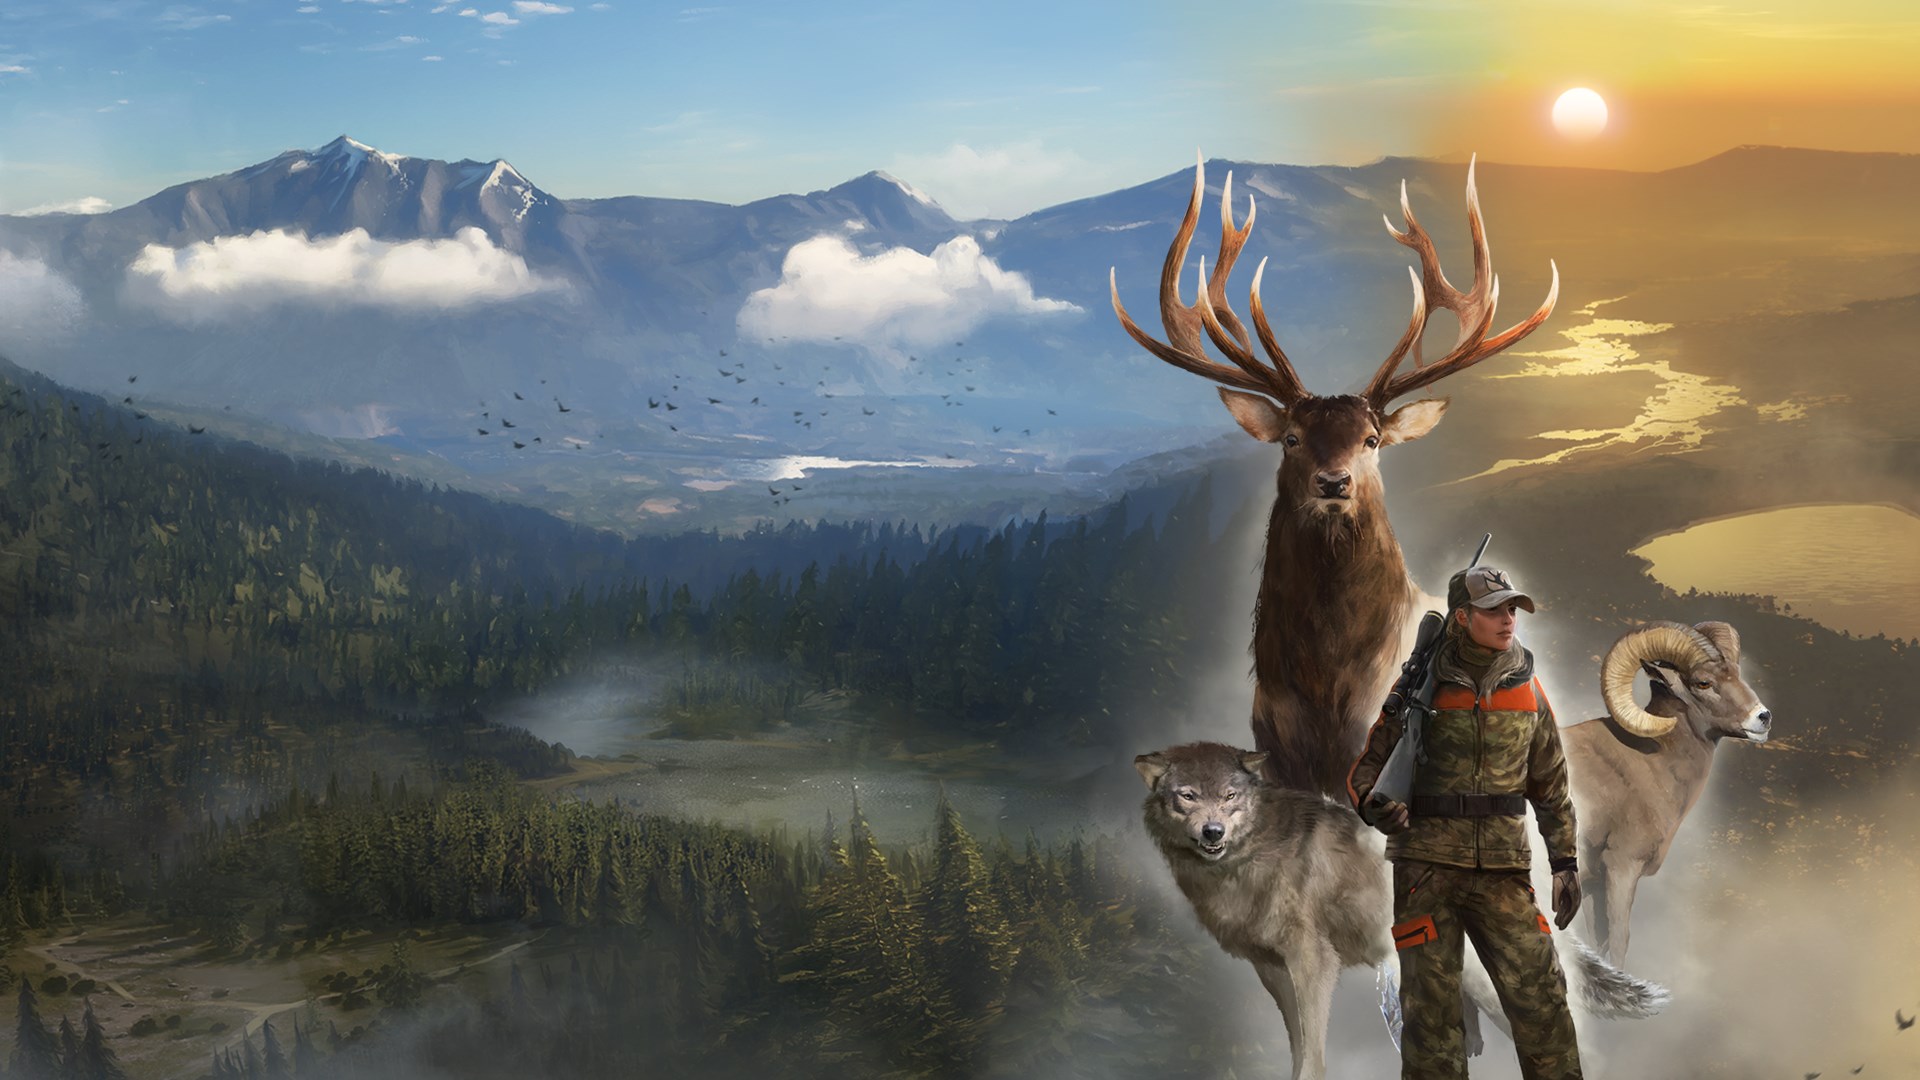 theHunter: Call of the Wild - Hunter Power Pack at the best price